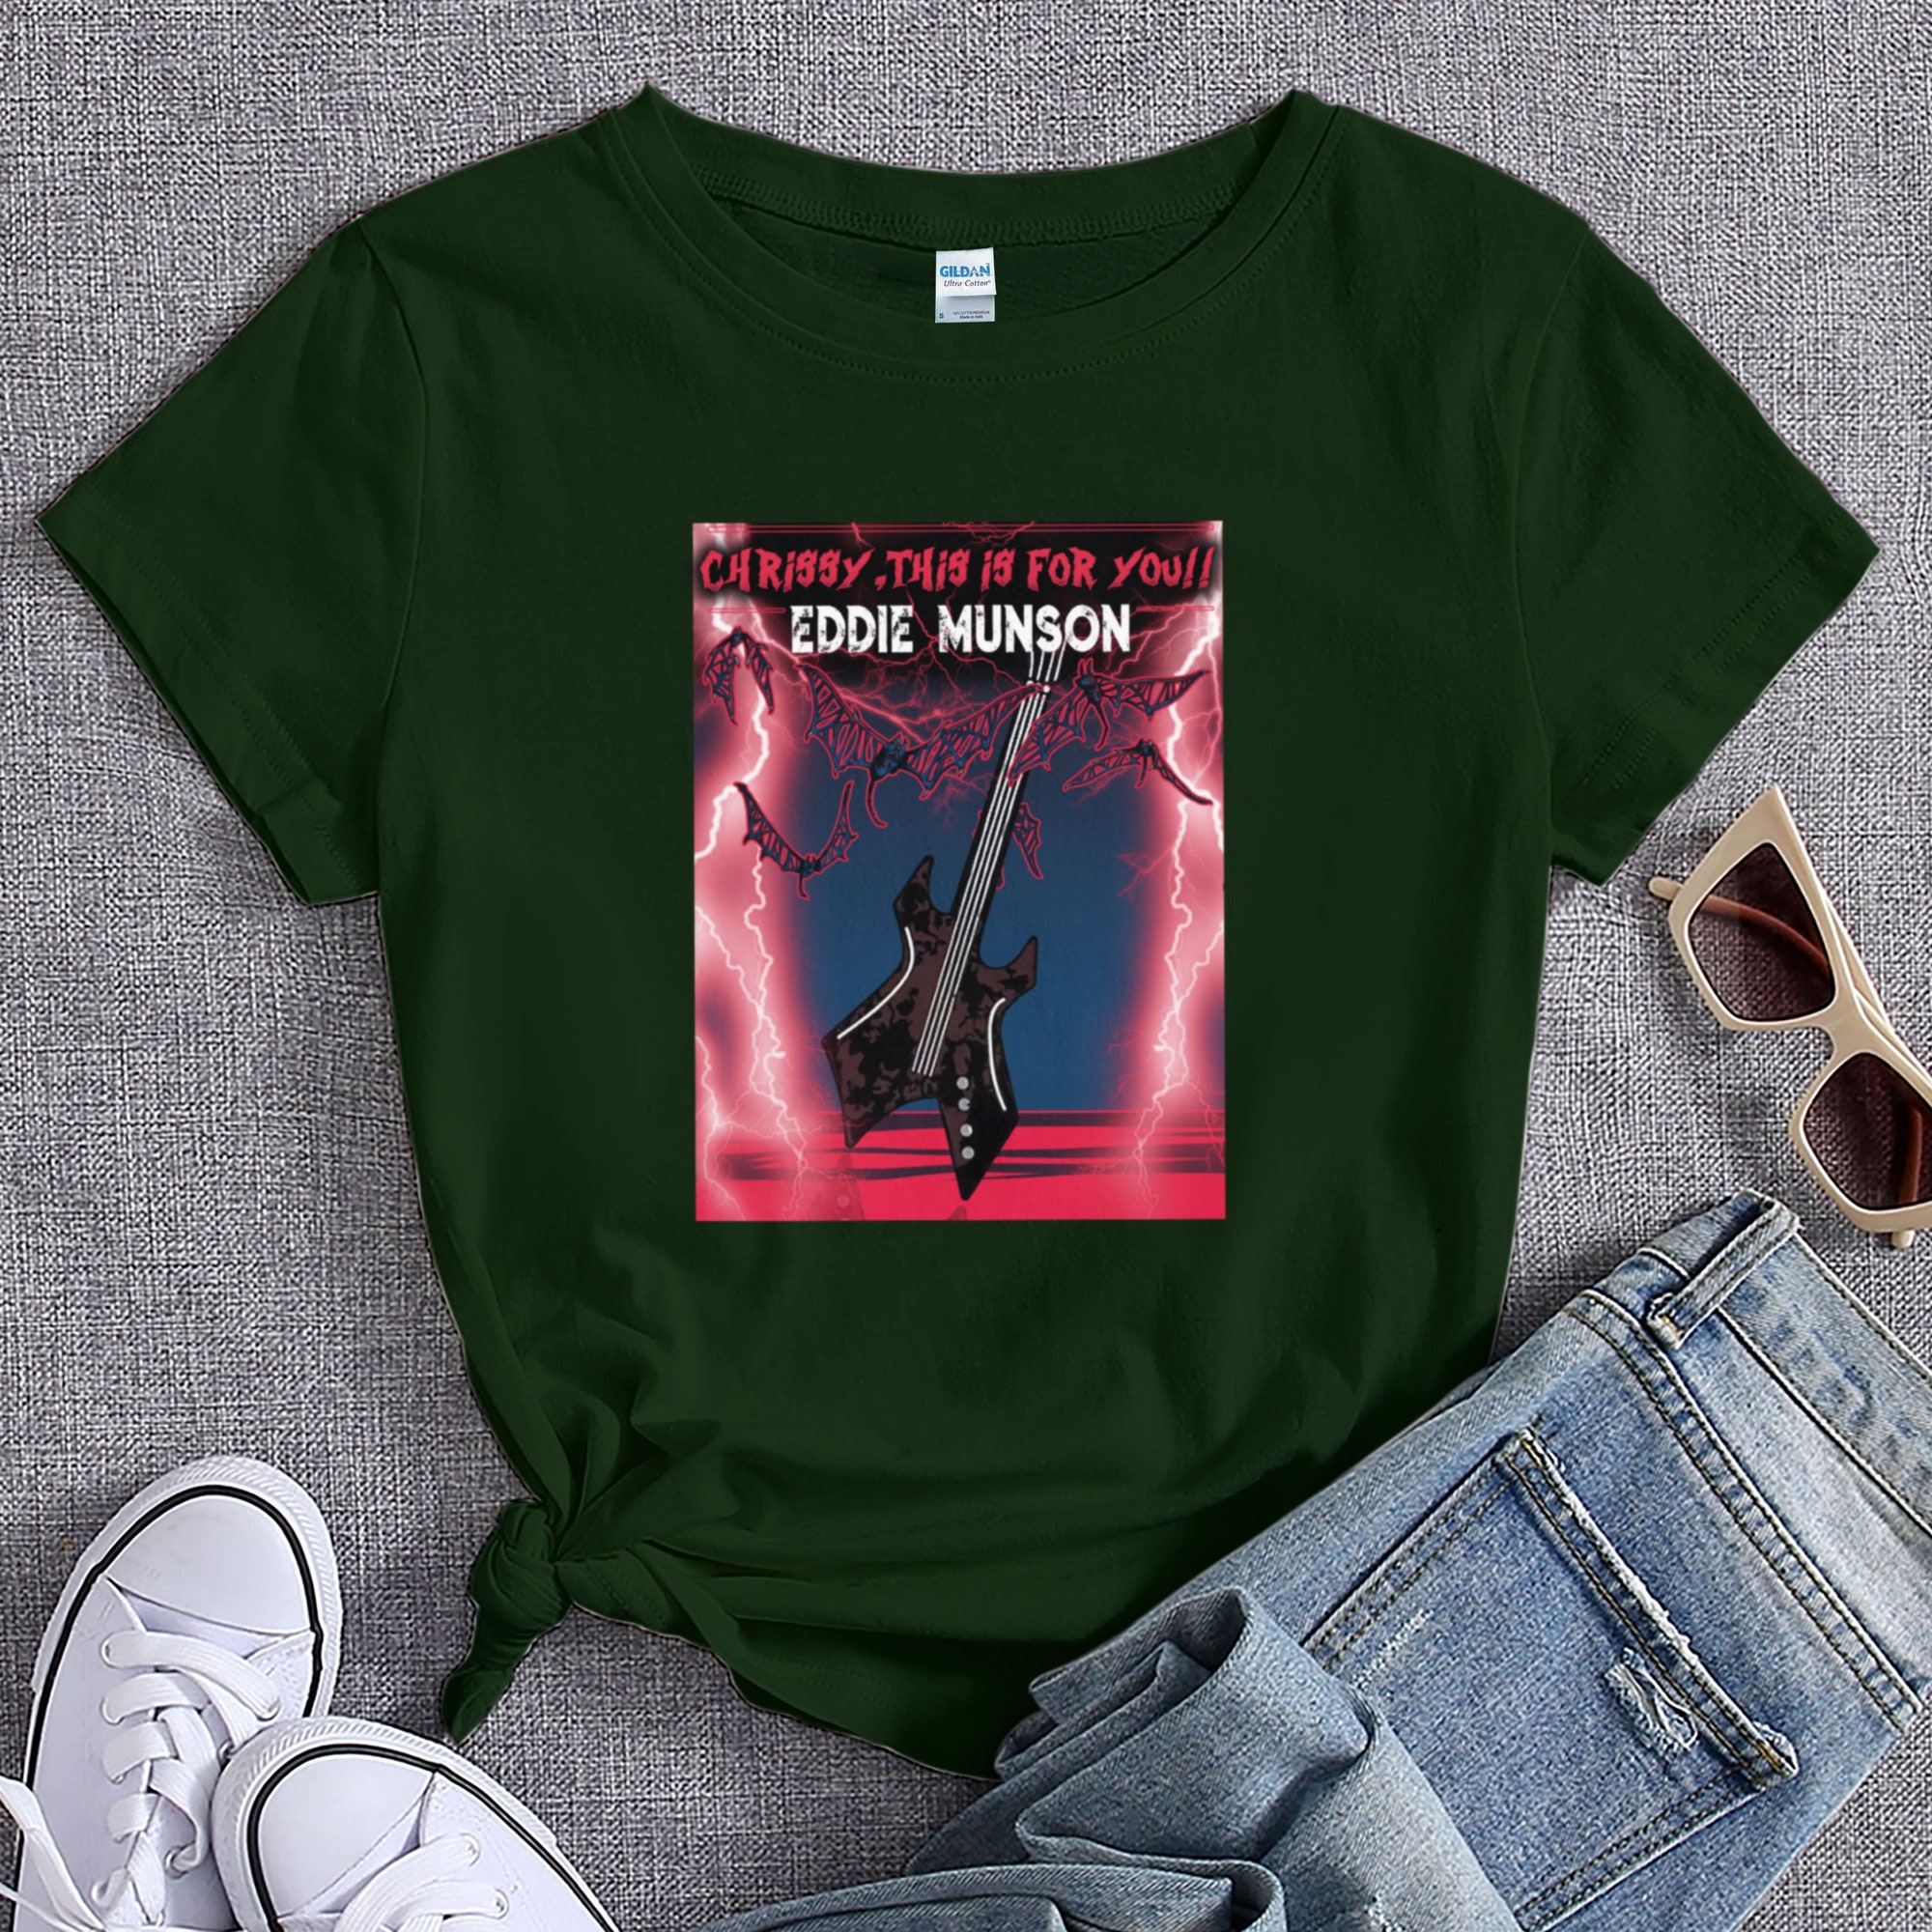 Discover EddieMunson Playing Guitar, Chrissy, This is for you, Guitar Shirt, Corroded coffin, Corroded coffin tee, Eddie Munson Shirt, ST4 Shirt